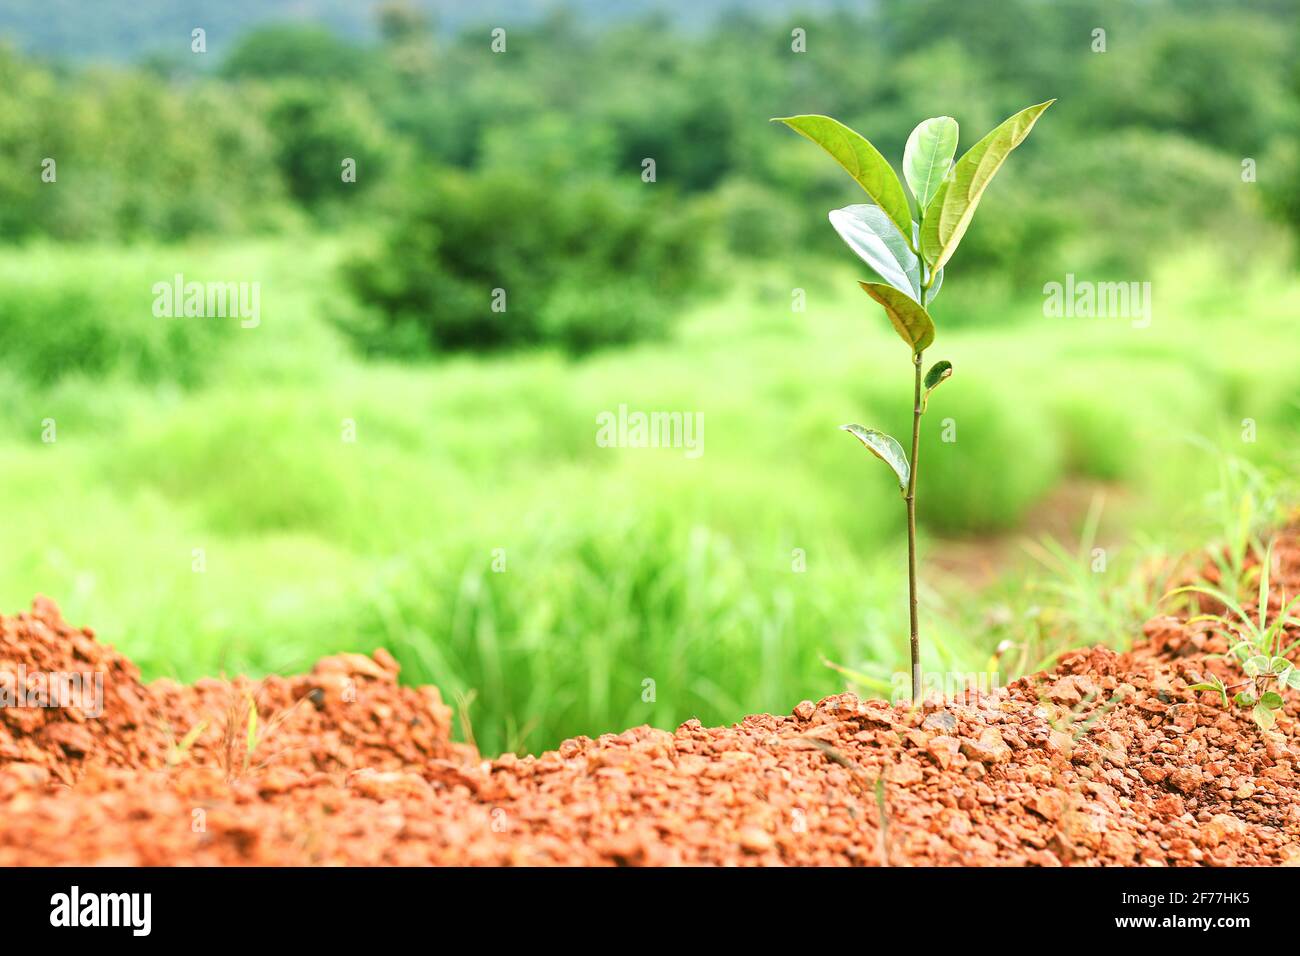 small jack fruit plant on green grass background. Stock Photo